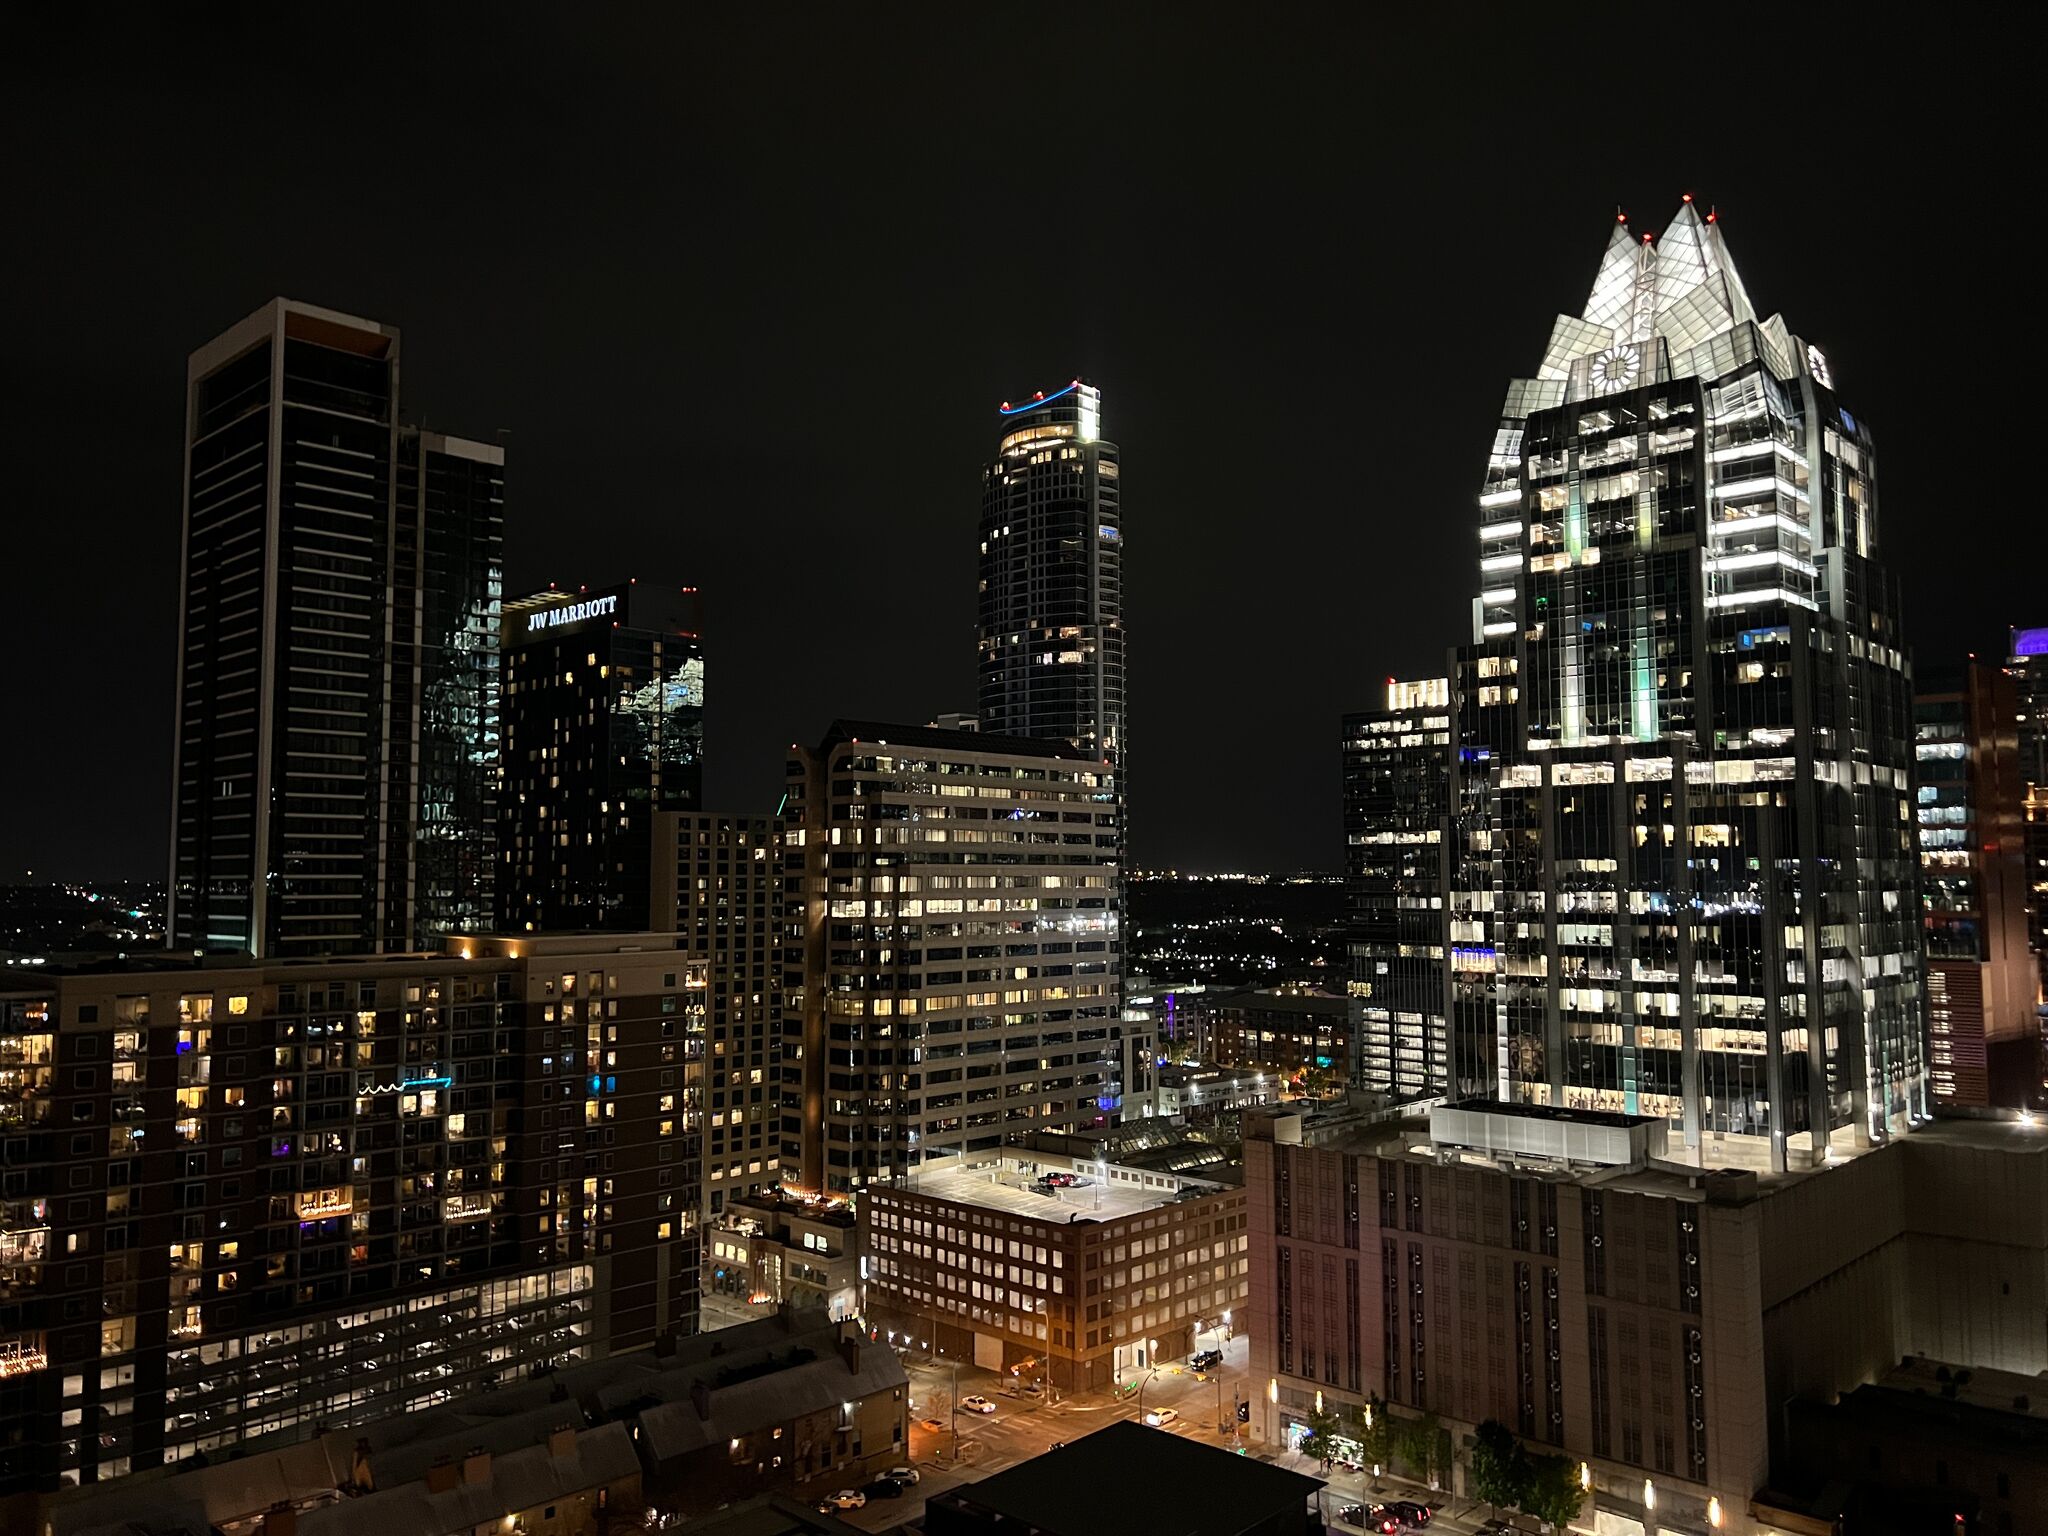 Texas lands 2 of the Top 10 best cities for jobs in US ranking